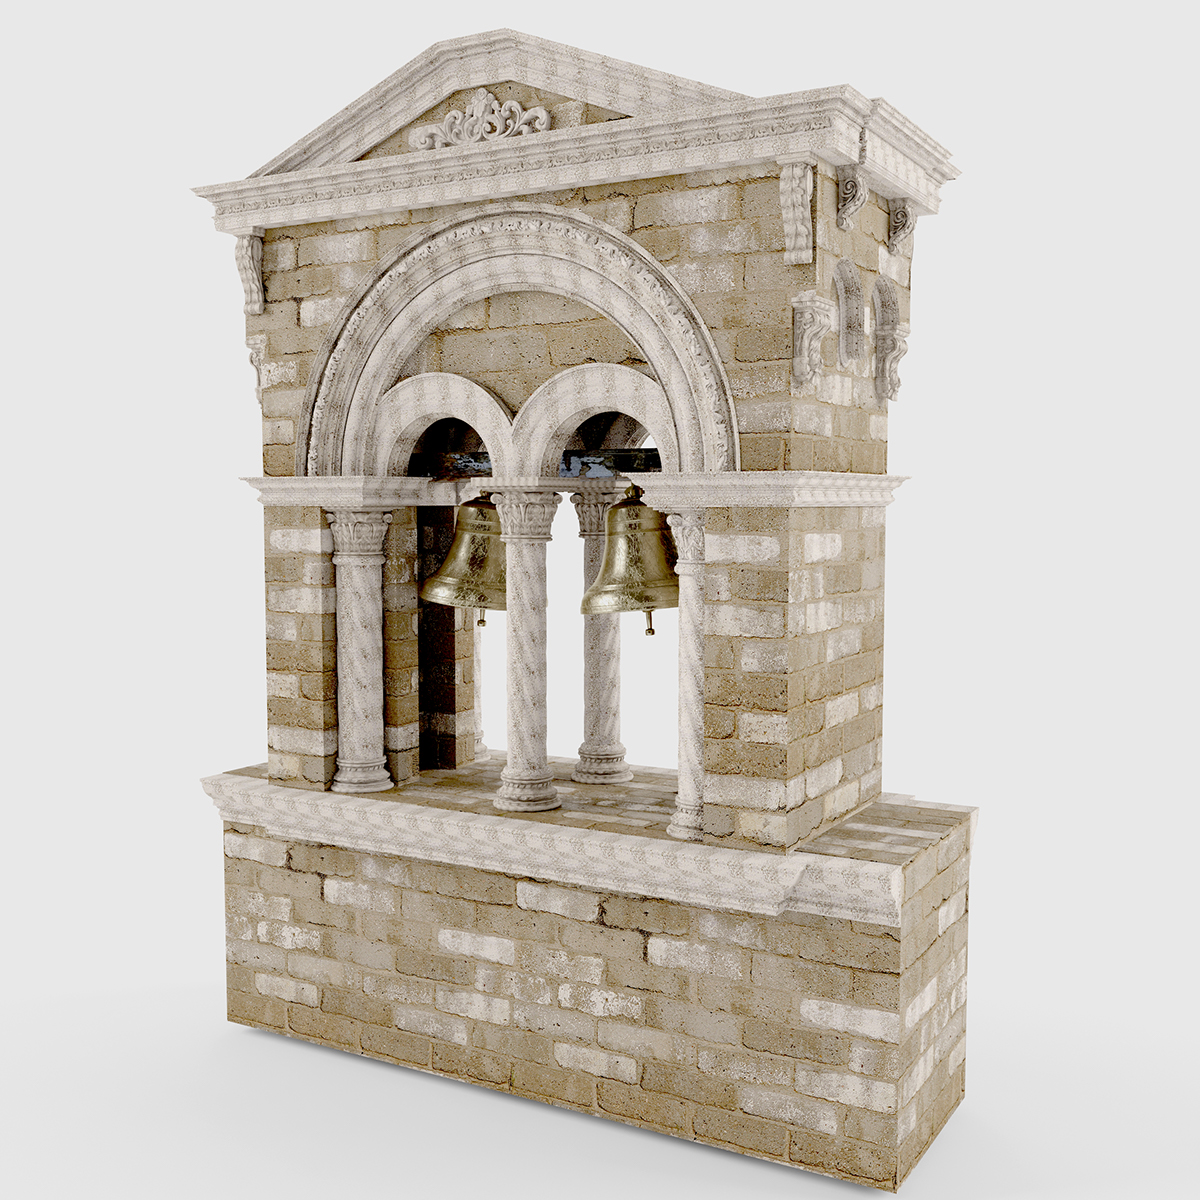 gothic 3D Render vray MAX obj 3dsmax archittectures animations church